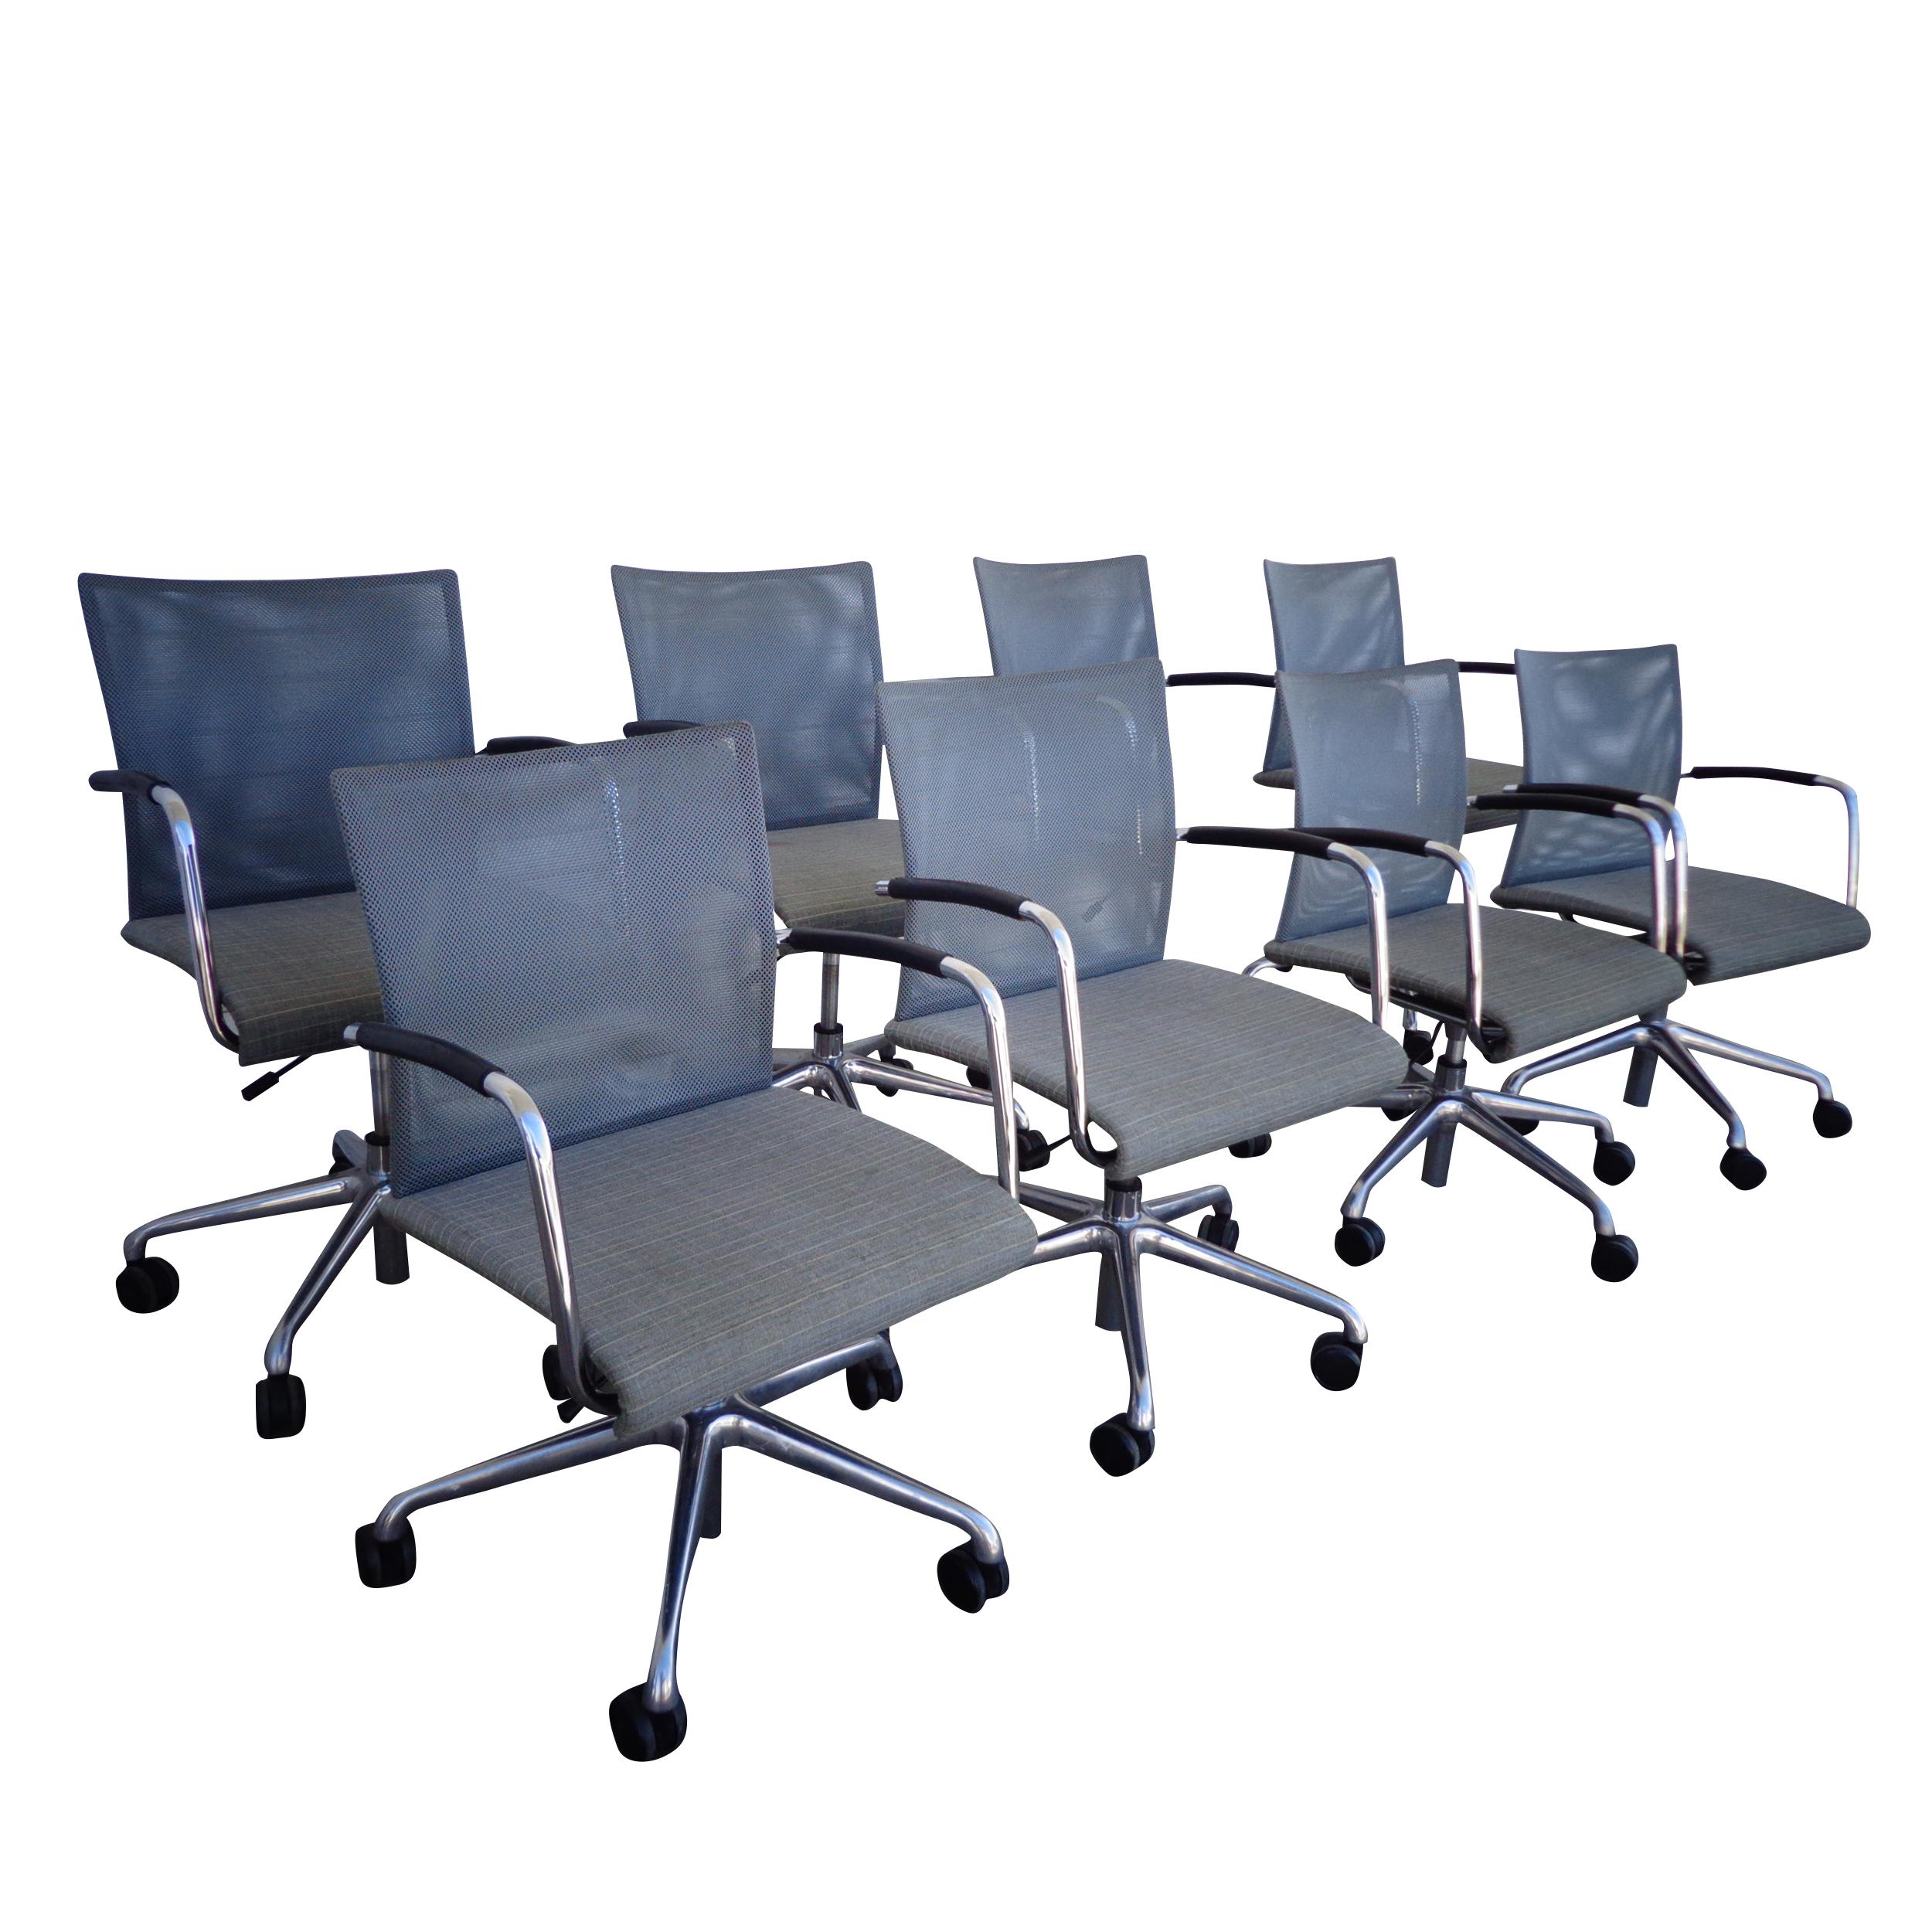 Modern 6 Dauphin Stilo Conference Chairs by Jessica Engelhardt For Sale